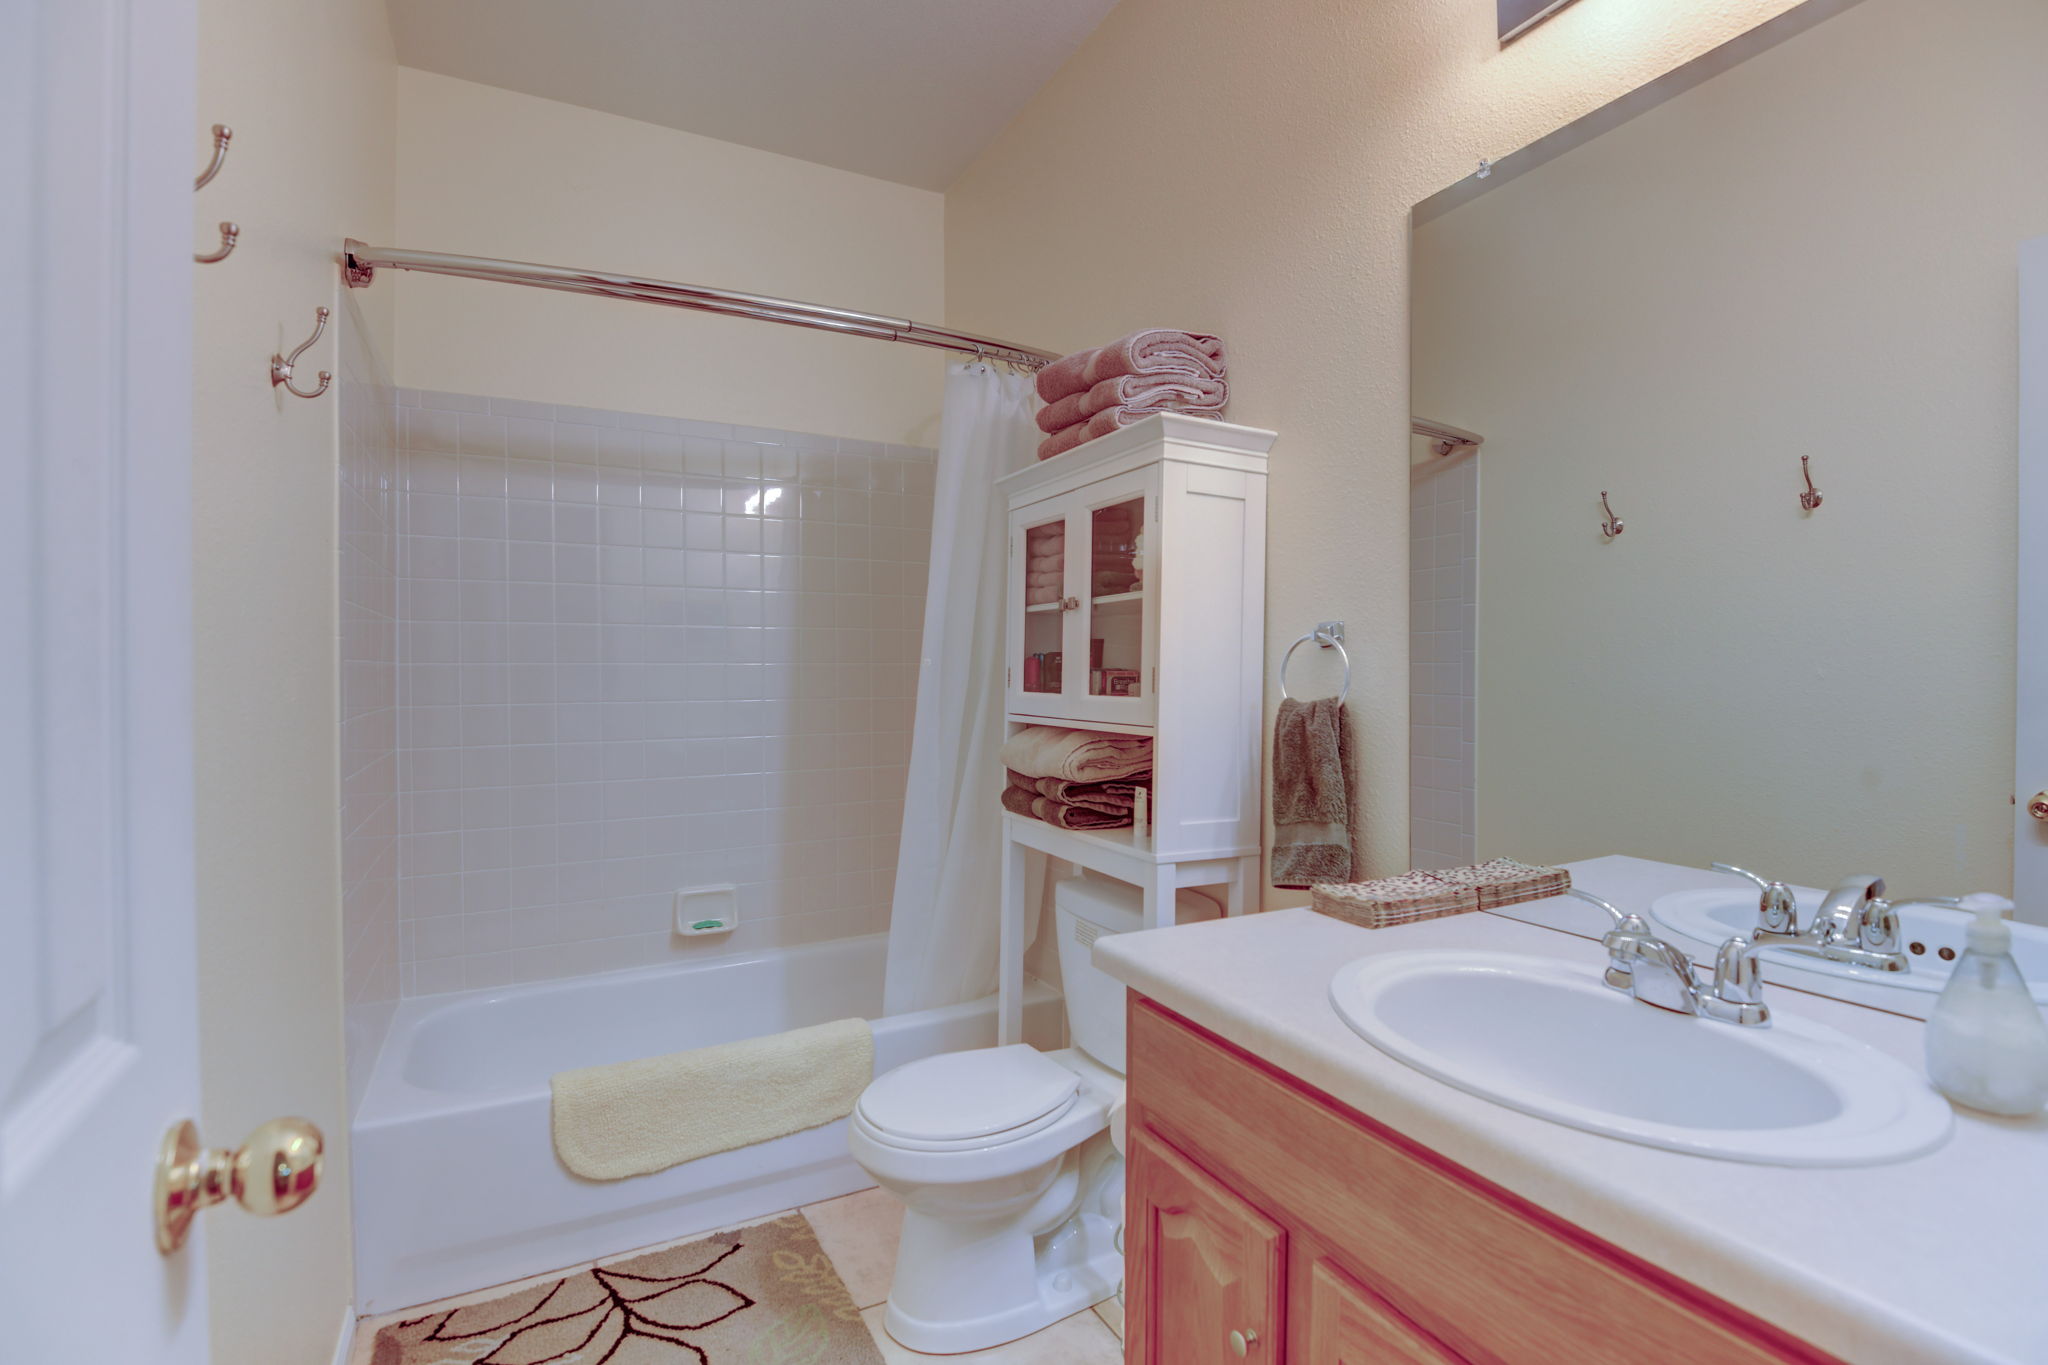 Lower level guest bathroom.